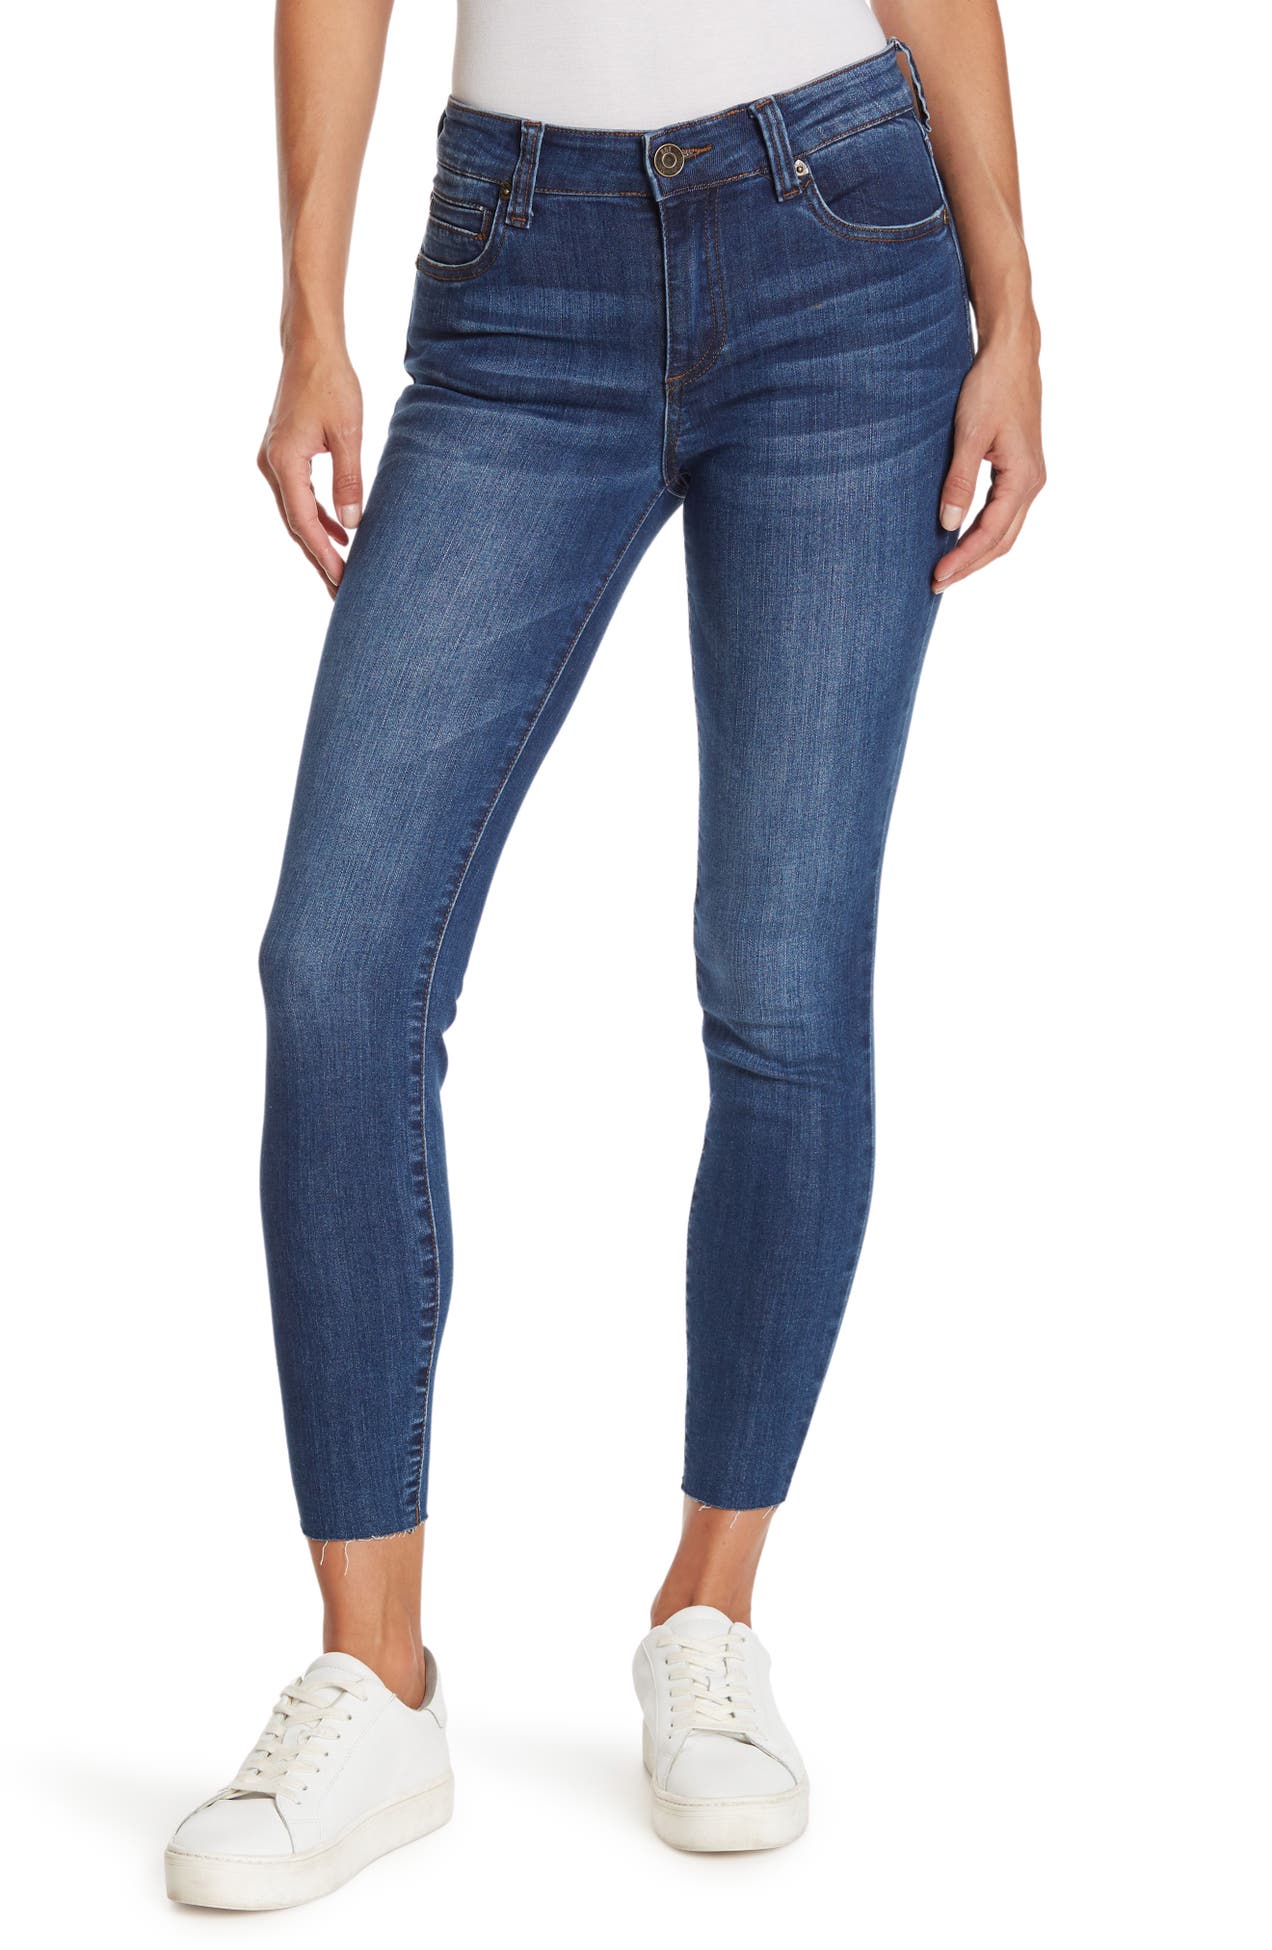 KUT from the Kloth | Carlo Ankle Length Skinny Jeans | Nordstrom Rack